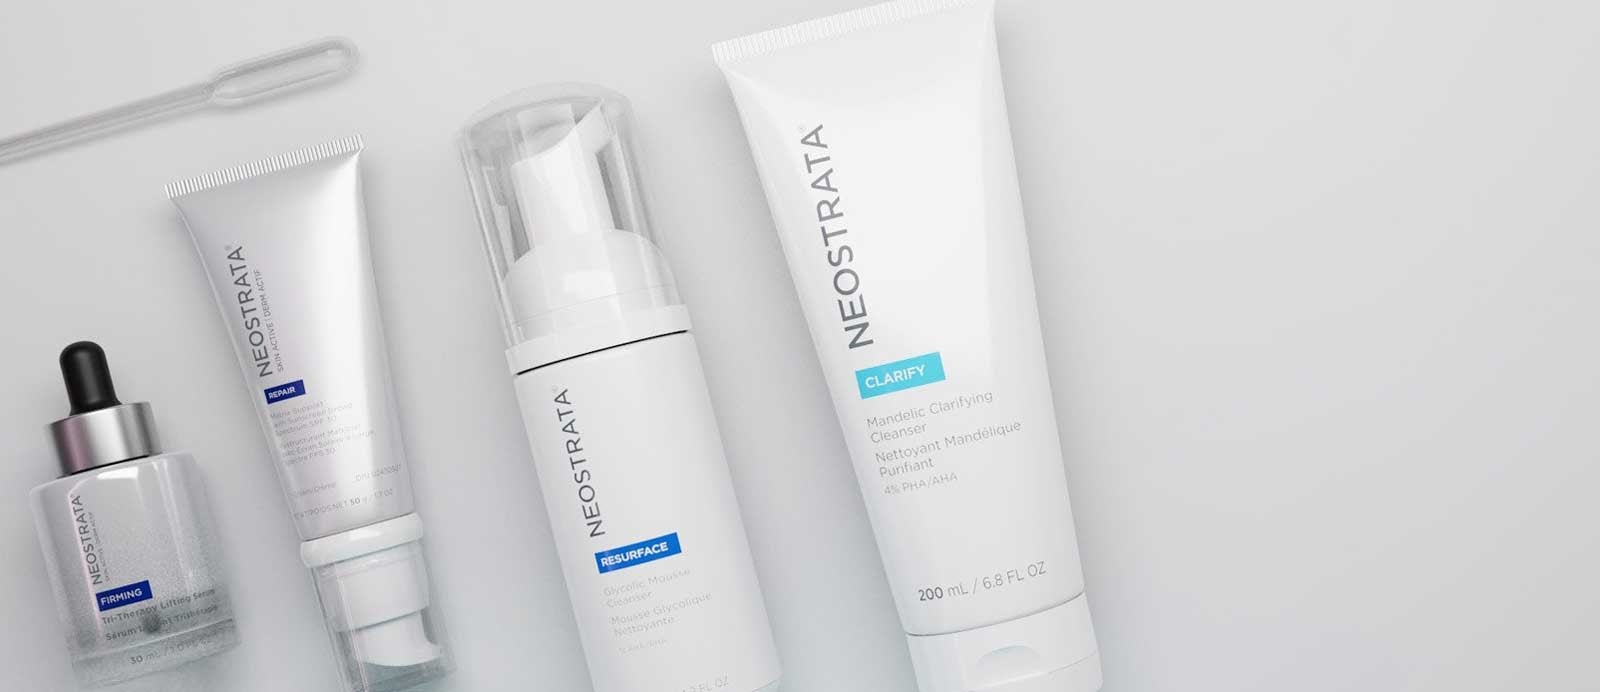 Is the NEOSTRATA Clarify Mandelic Clarifying Cleanser Really Worth it?